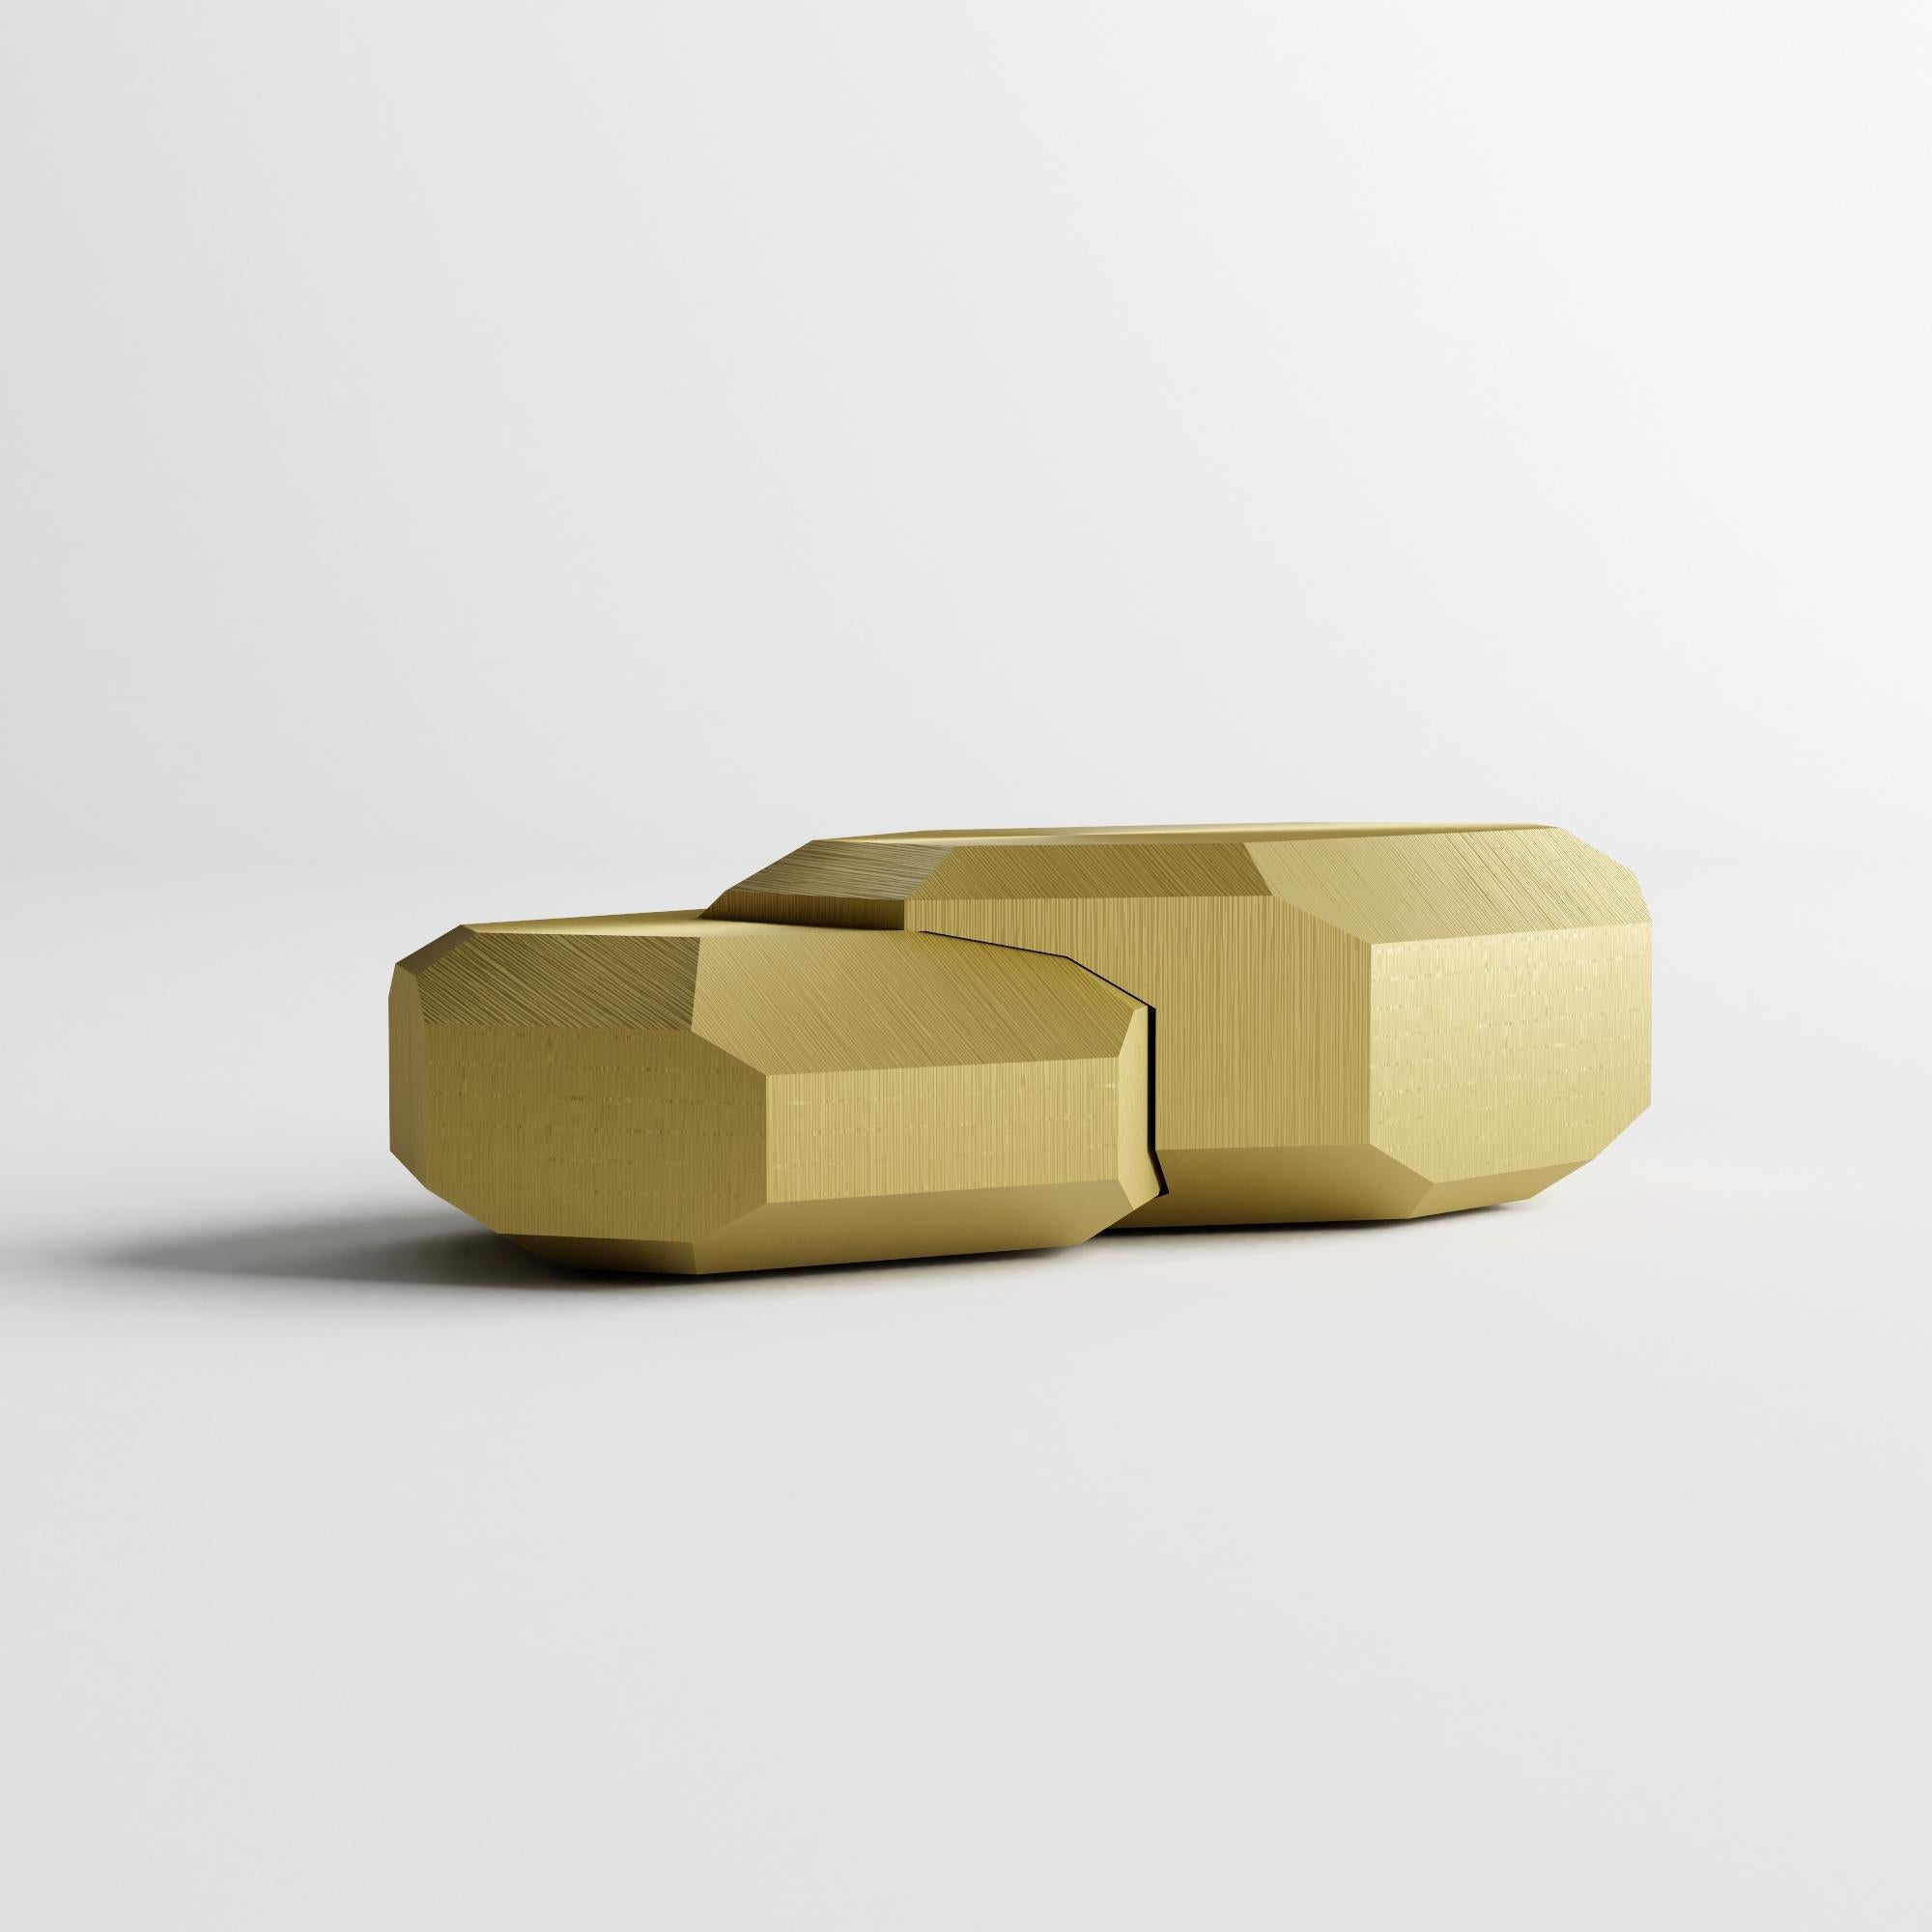 Crystal coffee table by Kasadamo and Pant, french artist - gold version : This masterpiece is developed in 3D print with bio sourced materials in collaboration with Pant (french artist). This facet design plays with lighting and allows us to reflect